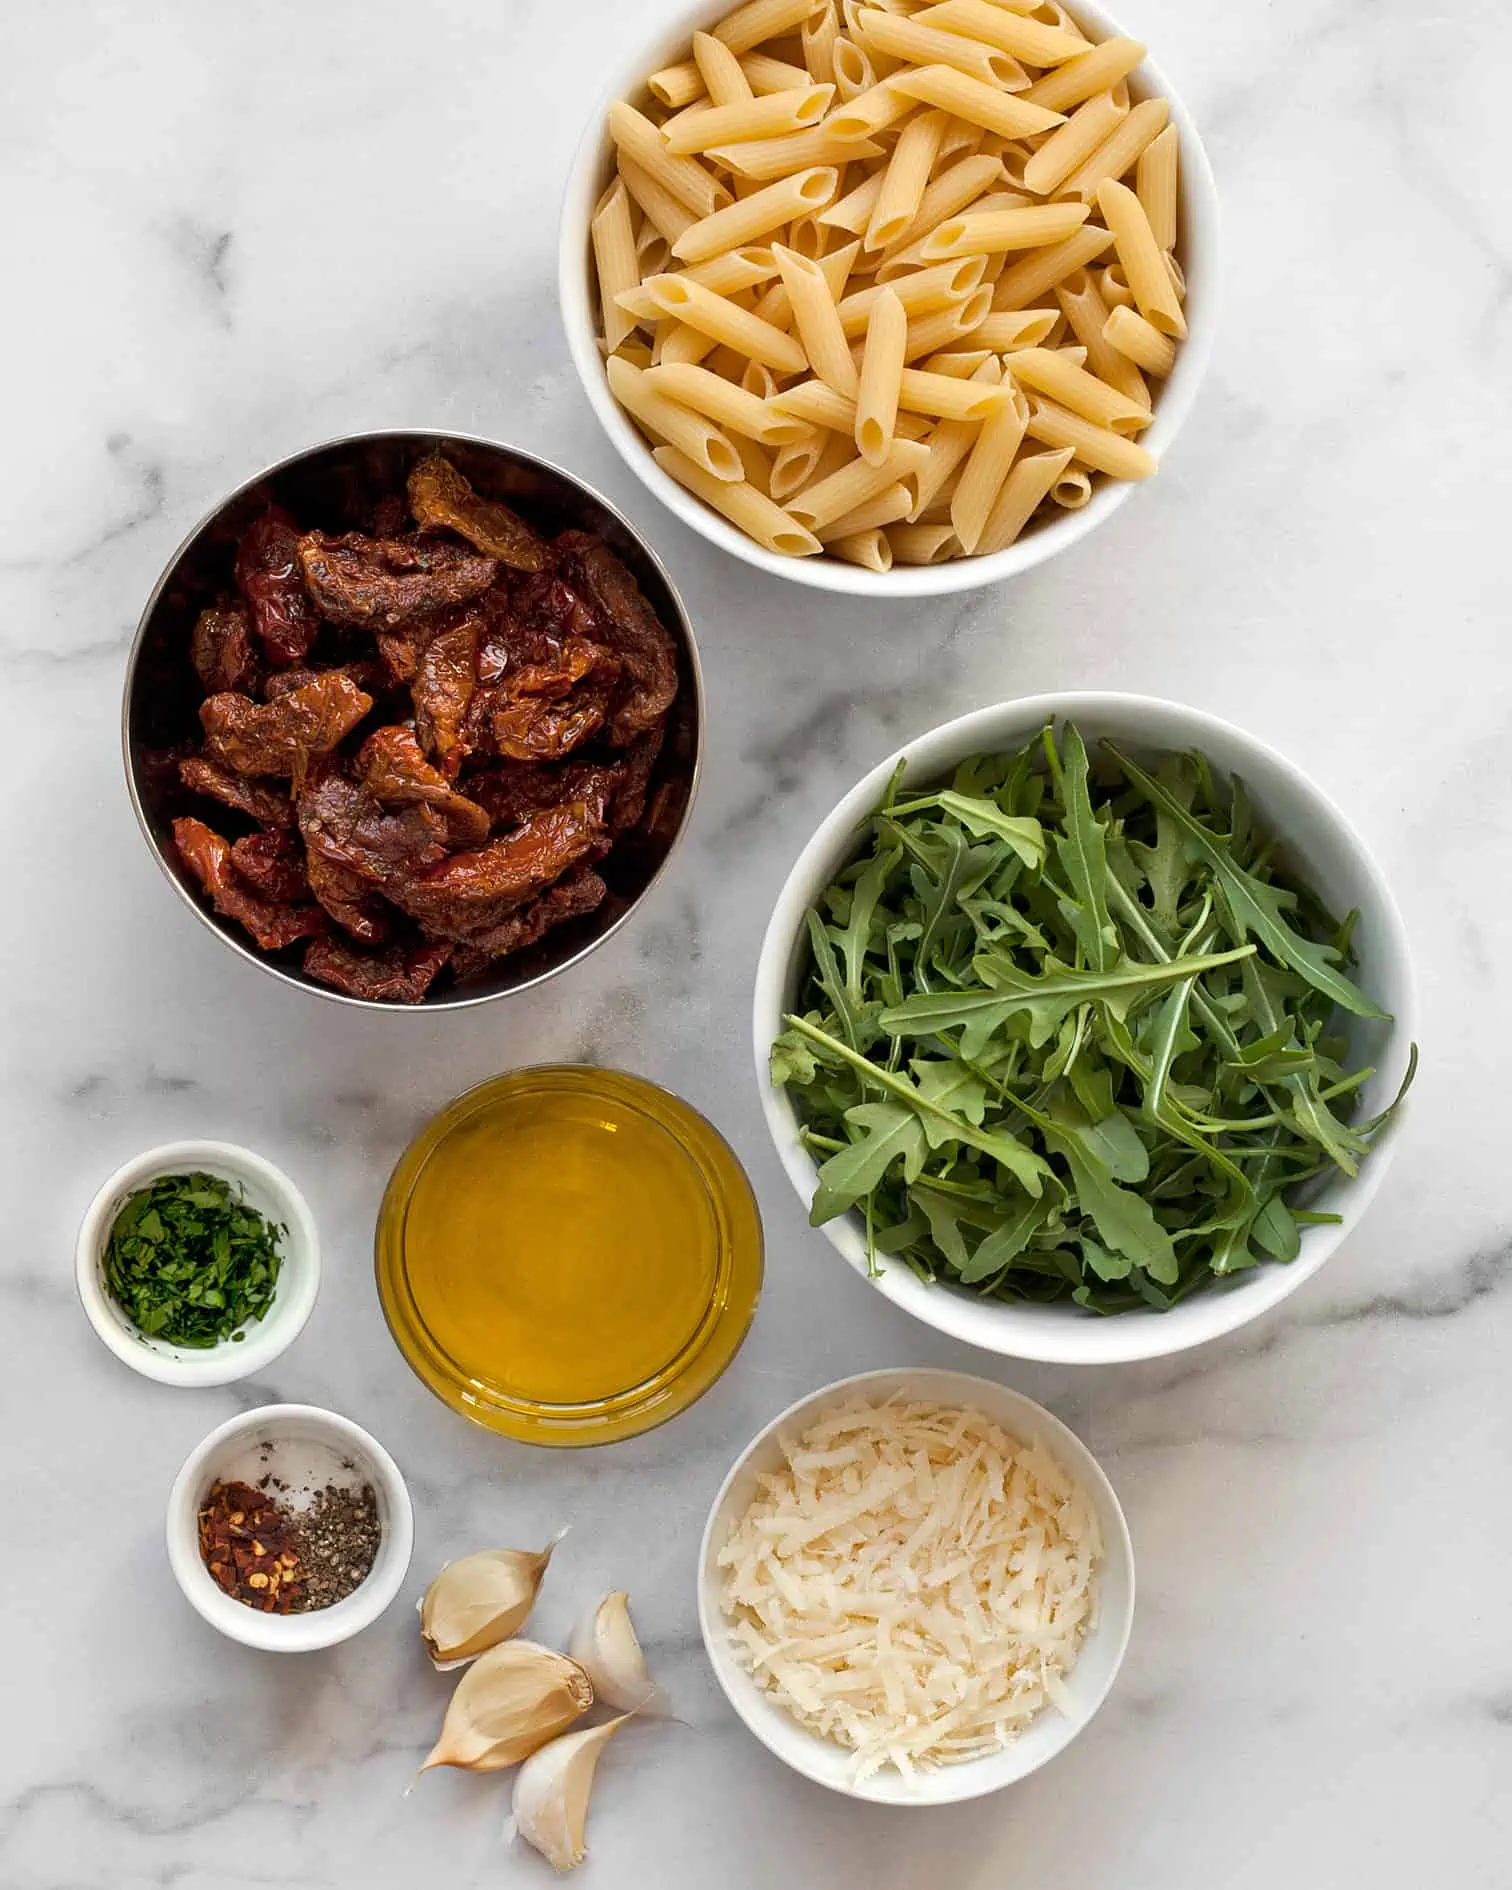 Ingredients including penne, sun dried tomatoes, arugula, olive oil, garlic and parmesan